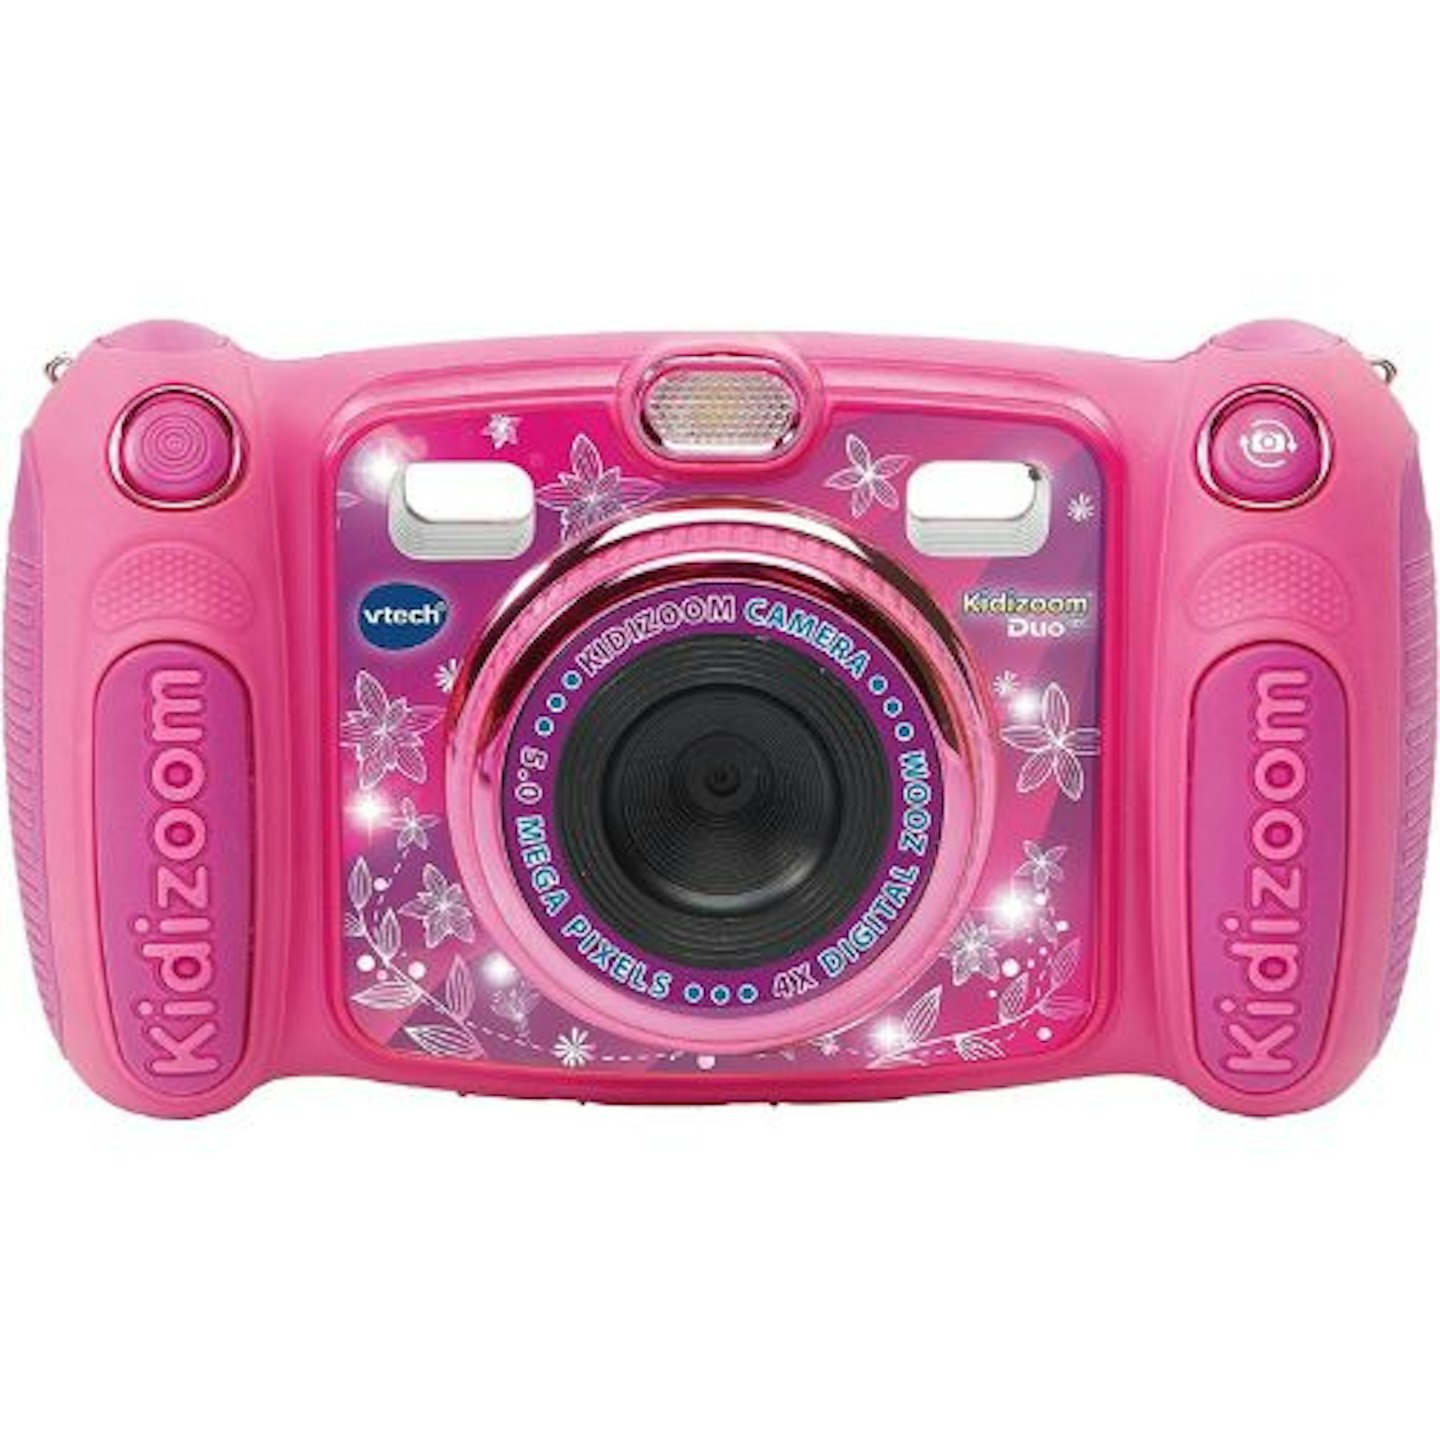 best camera for kids kidizoom duo